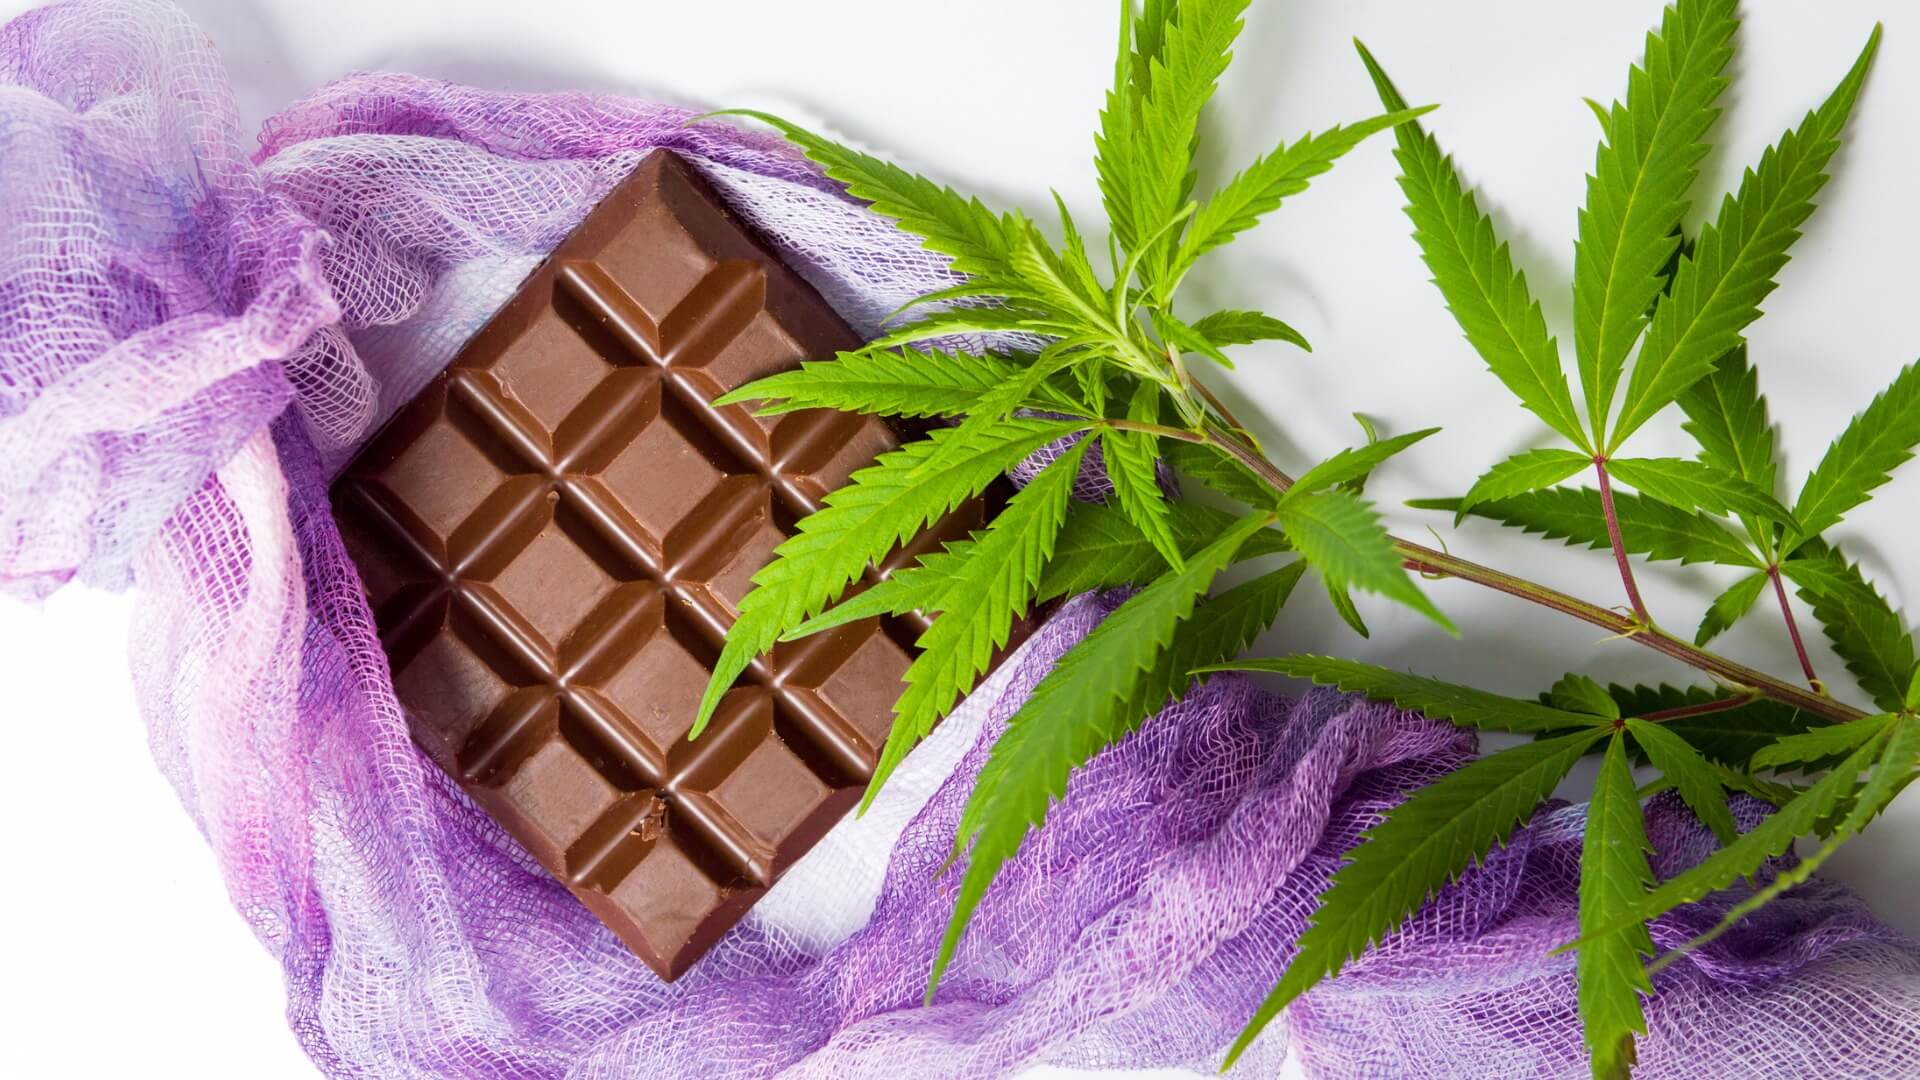 chocolate and cannabis leaves